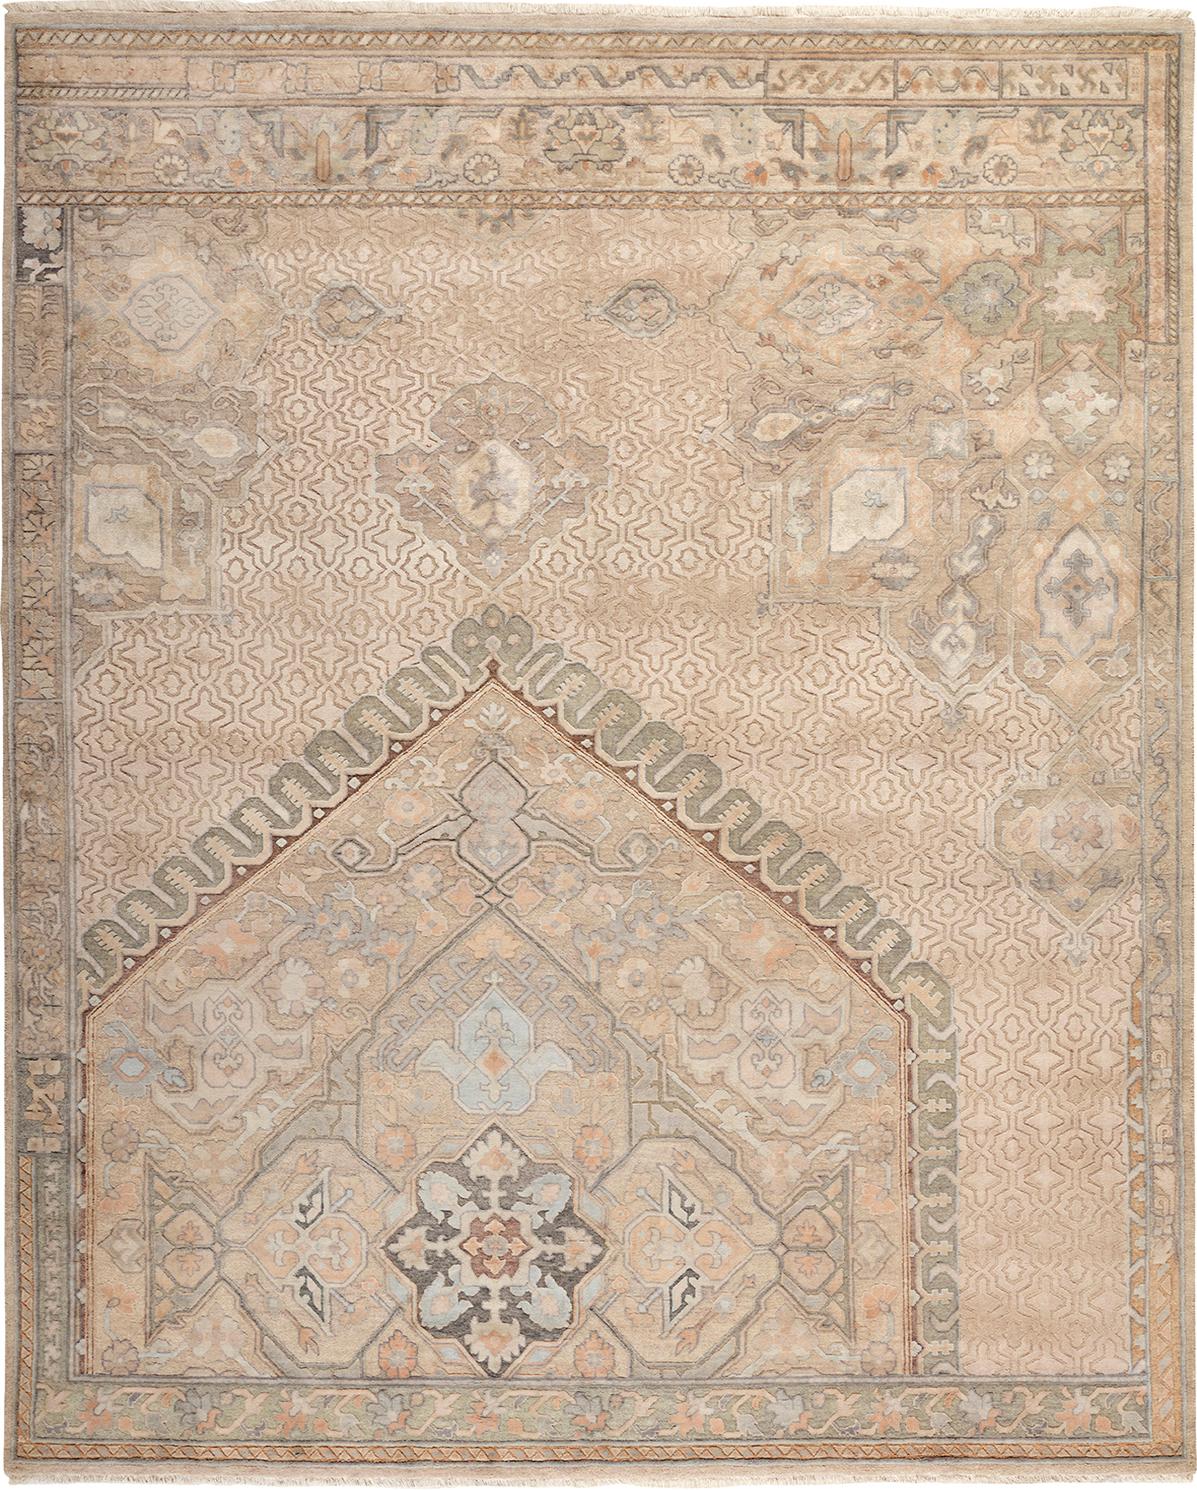 This Oushak is a very beautiful example of the masterful Turkish classical weaving.
Inspired by the Vagireh sampler, the design carries the sweet scent of
nostalgia with its ageless artistry and appeal.

Available in colors Aqua Rust and Grey Gold